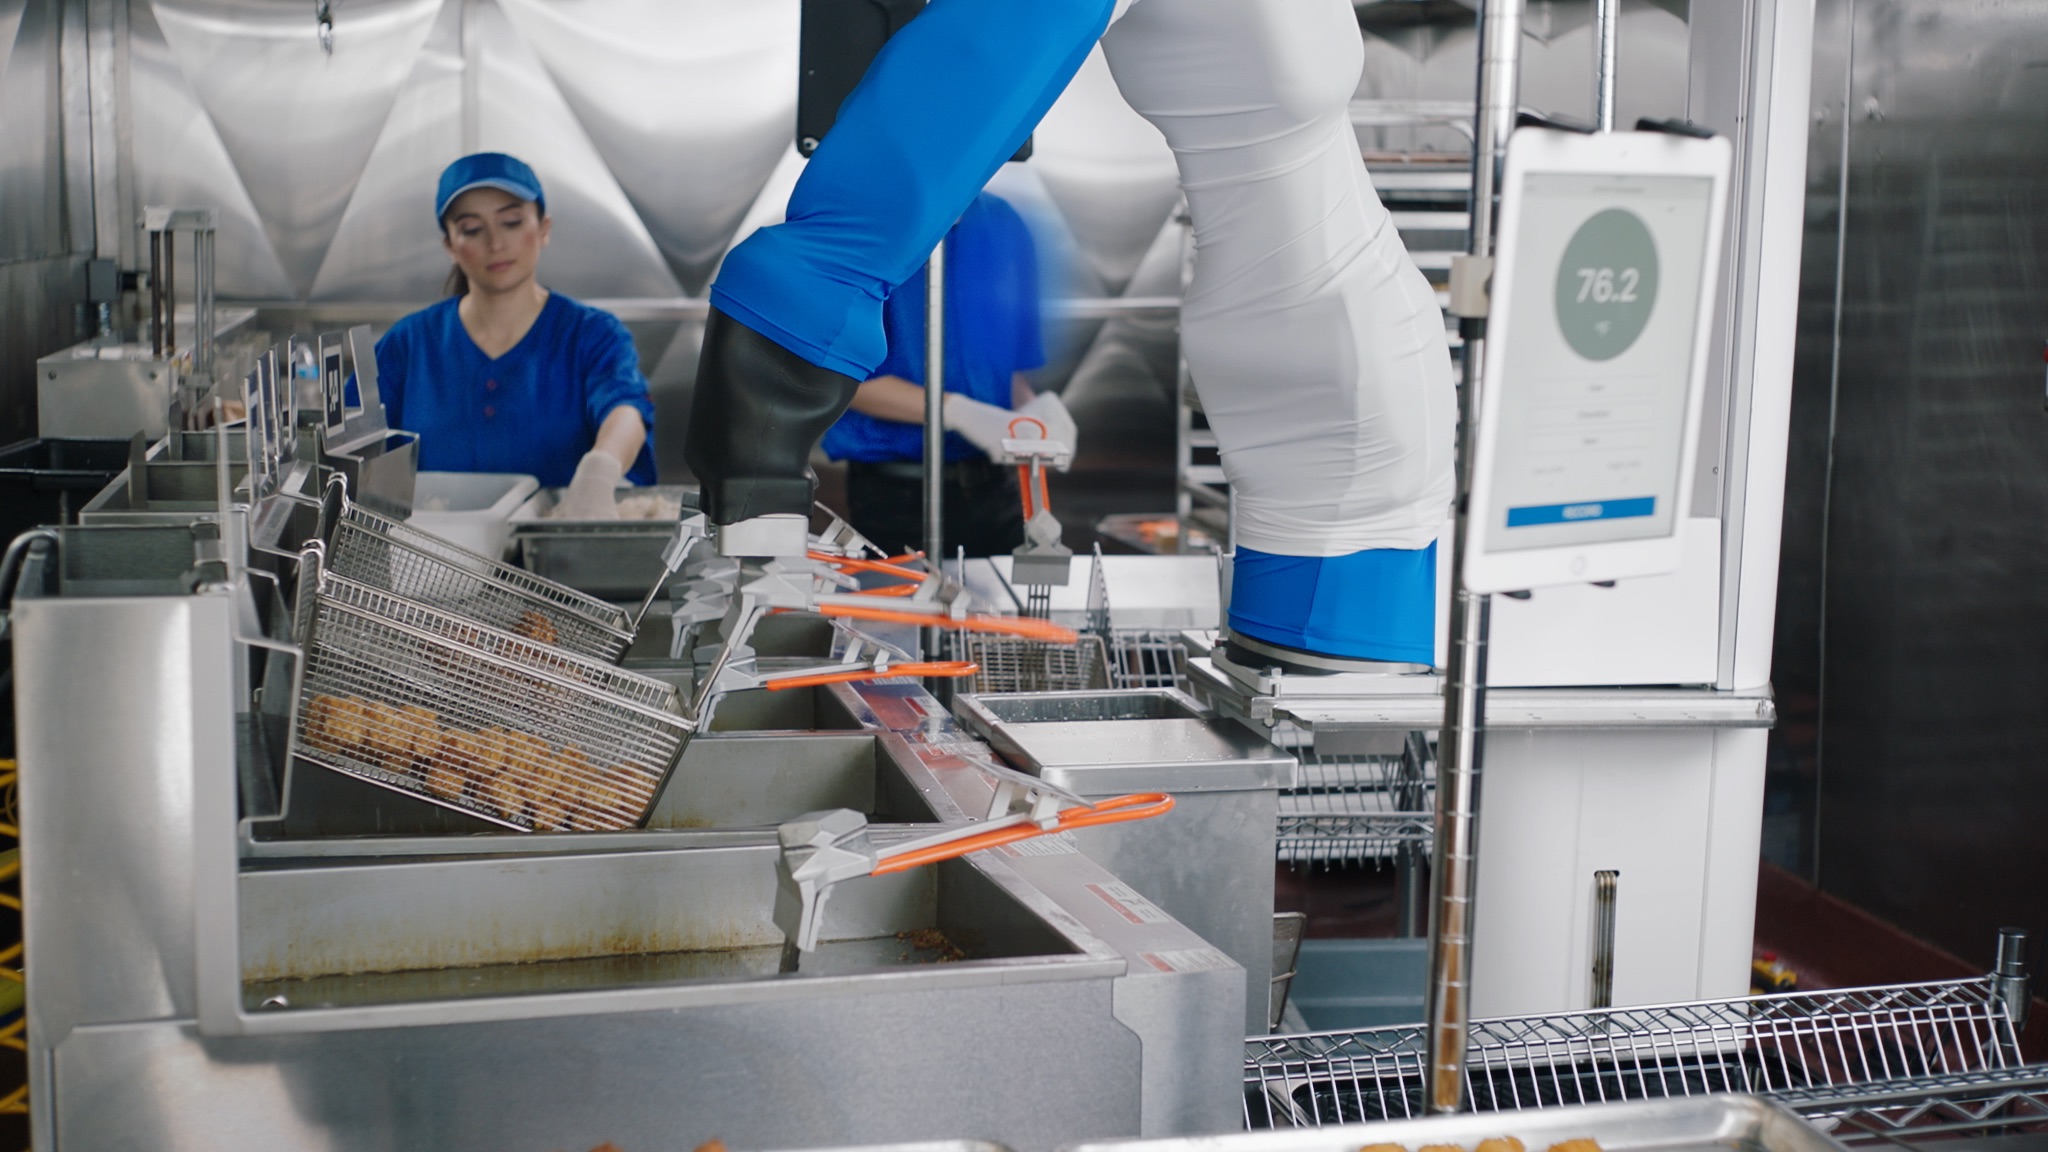 Flippy, a robotic fry cook, is pictured operating in a kitchen. (Miso Robotics)